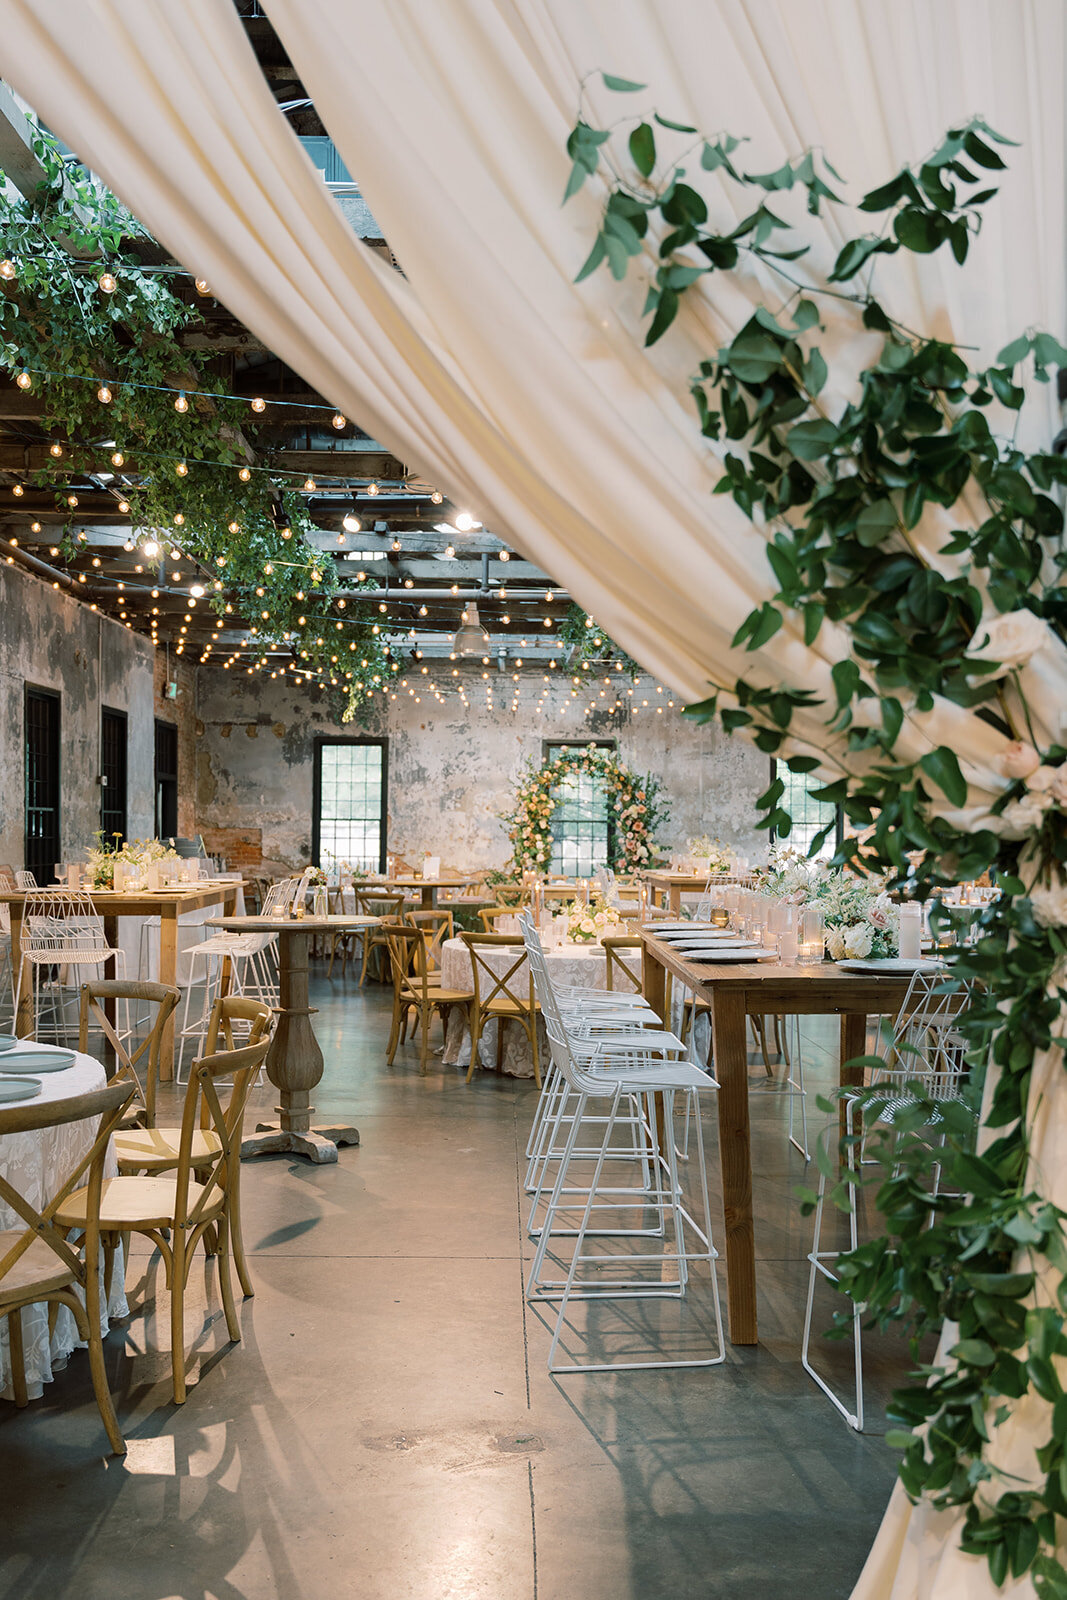 Reception set up at the Washington mill dye house with lush greenery and blush, peach and white florals.